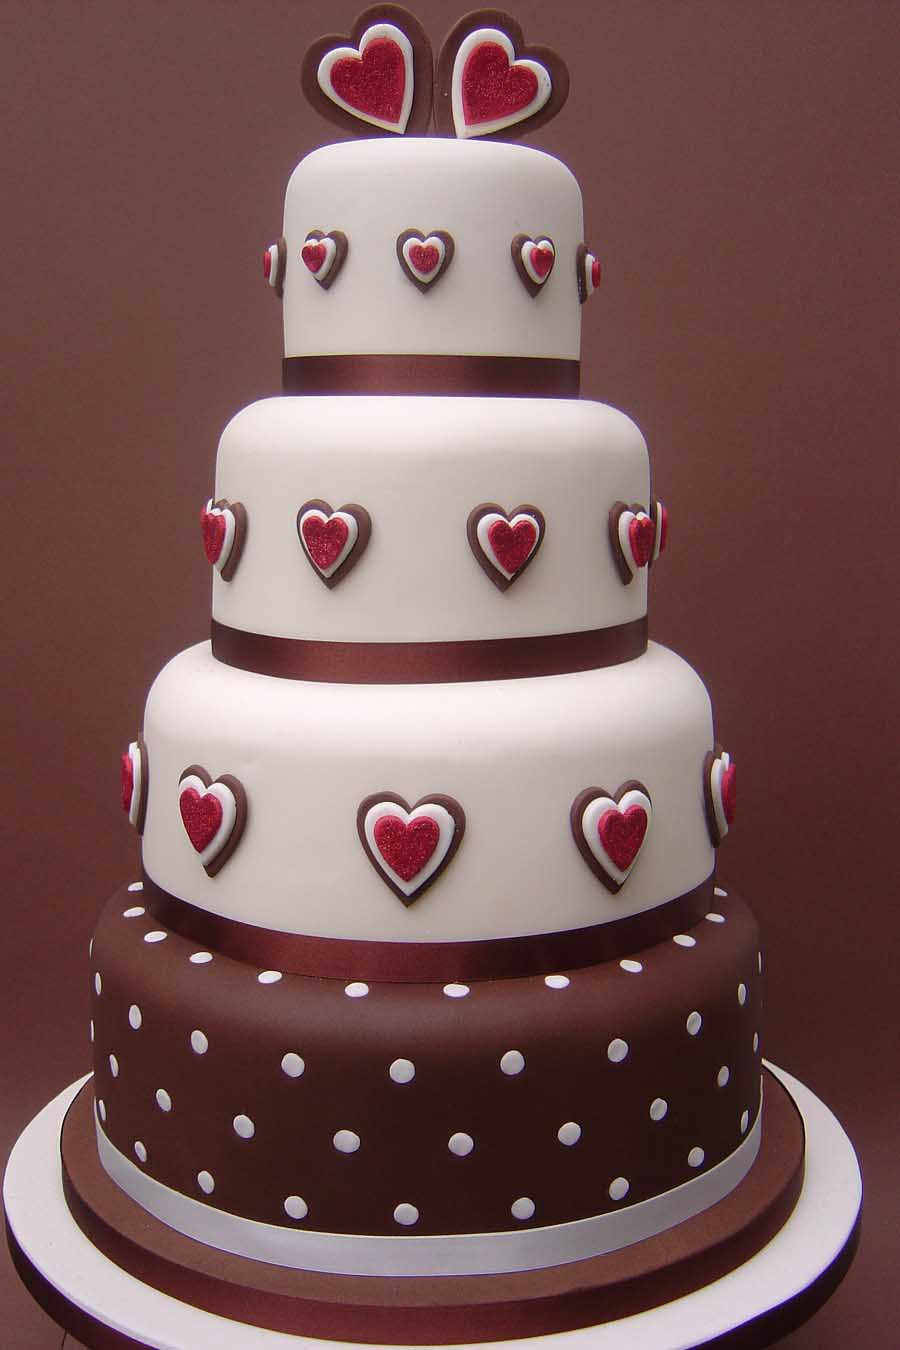 Cakes Design for Wedding the top 20 Ideas About Latest Wedding Cake Designs Starsricha